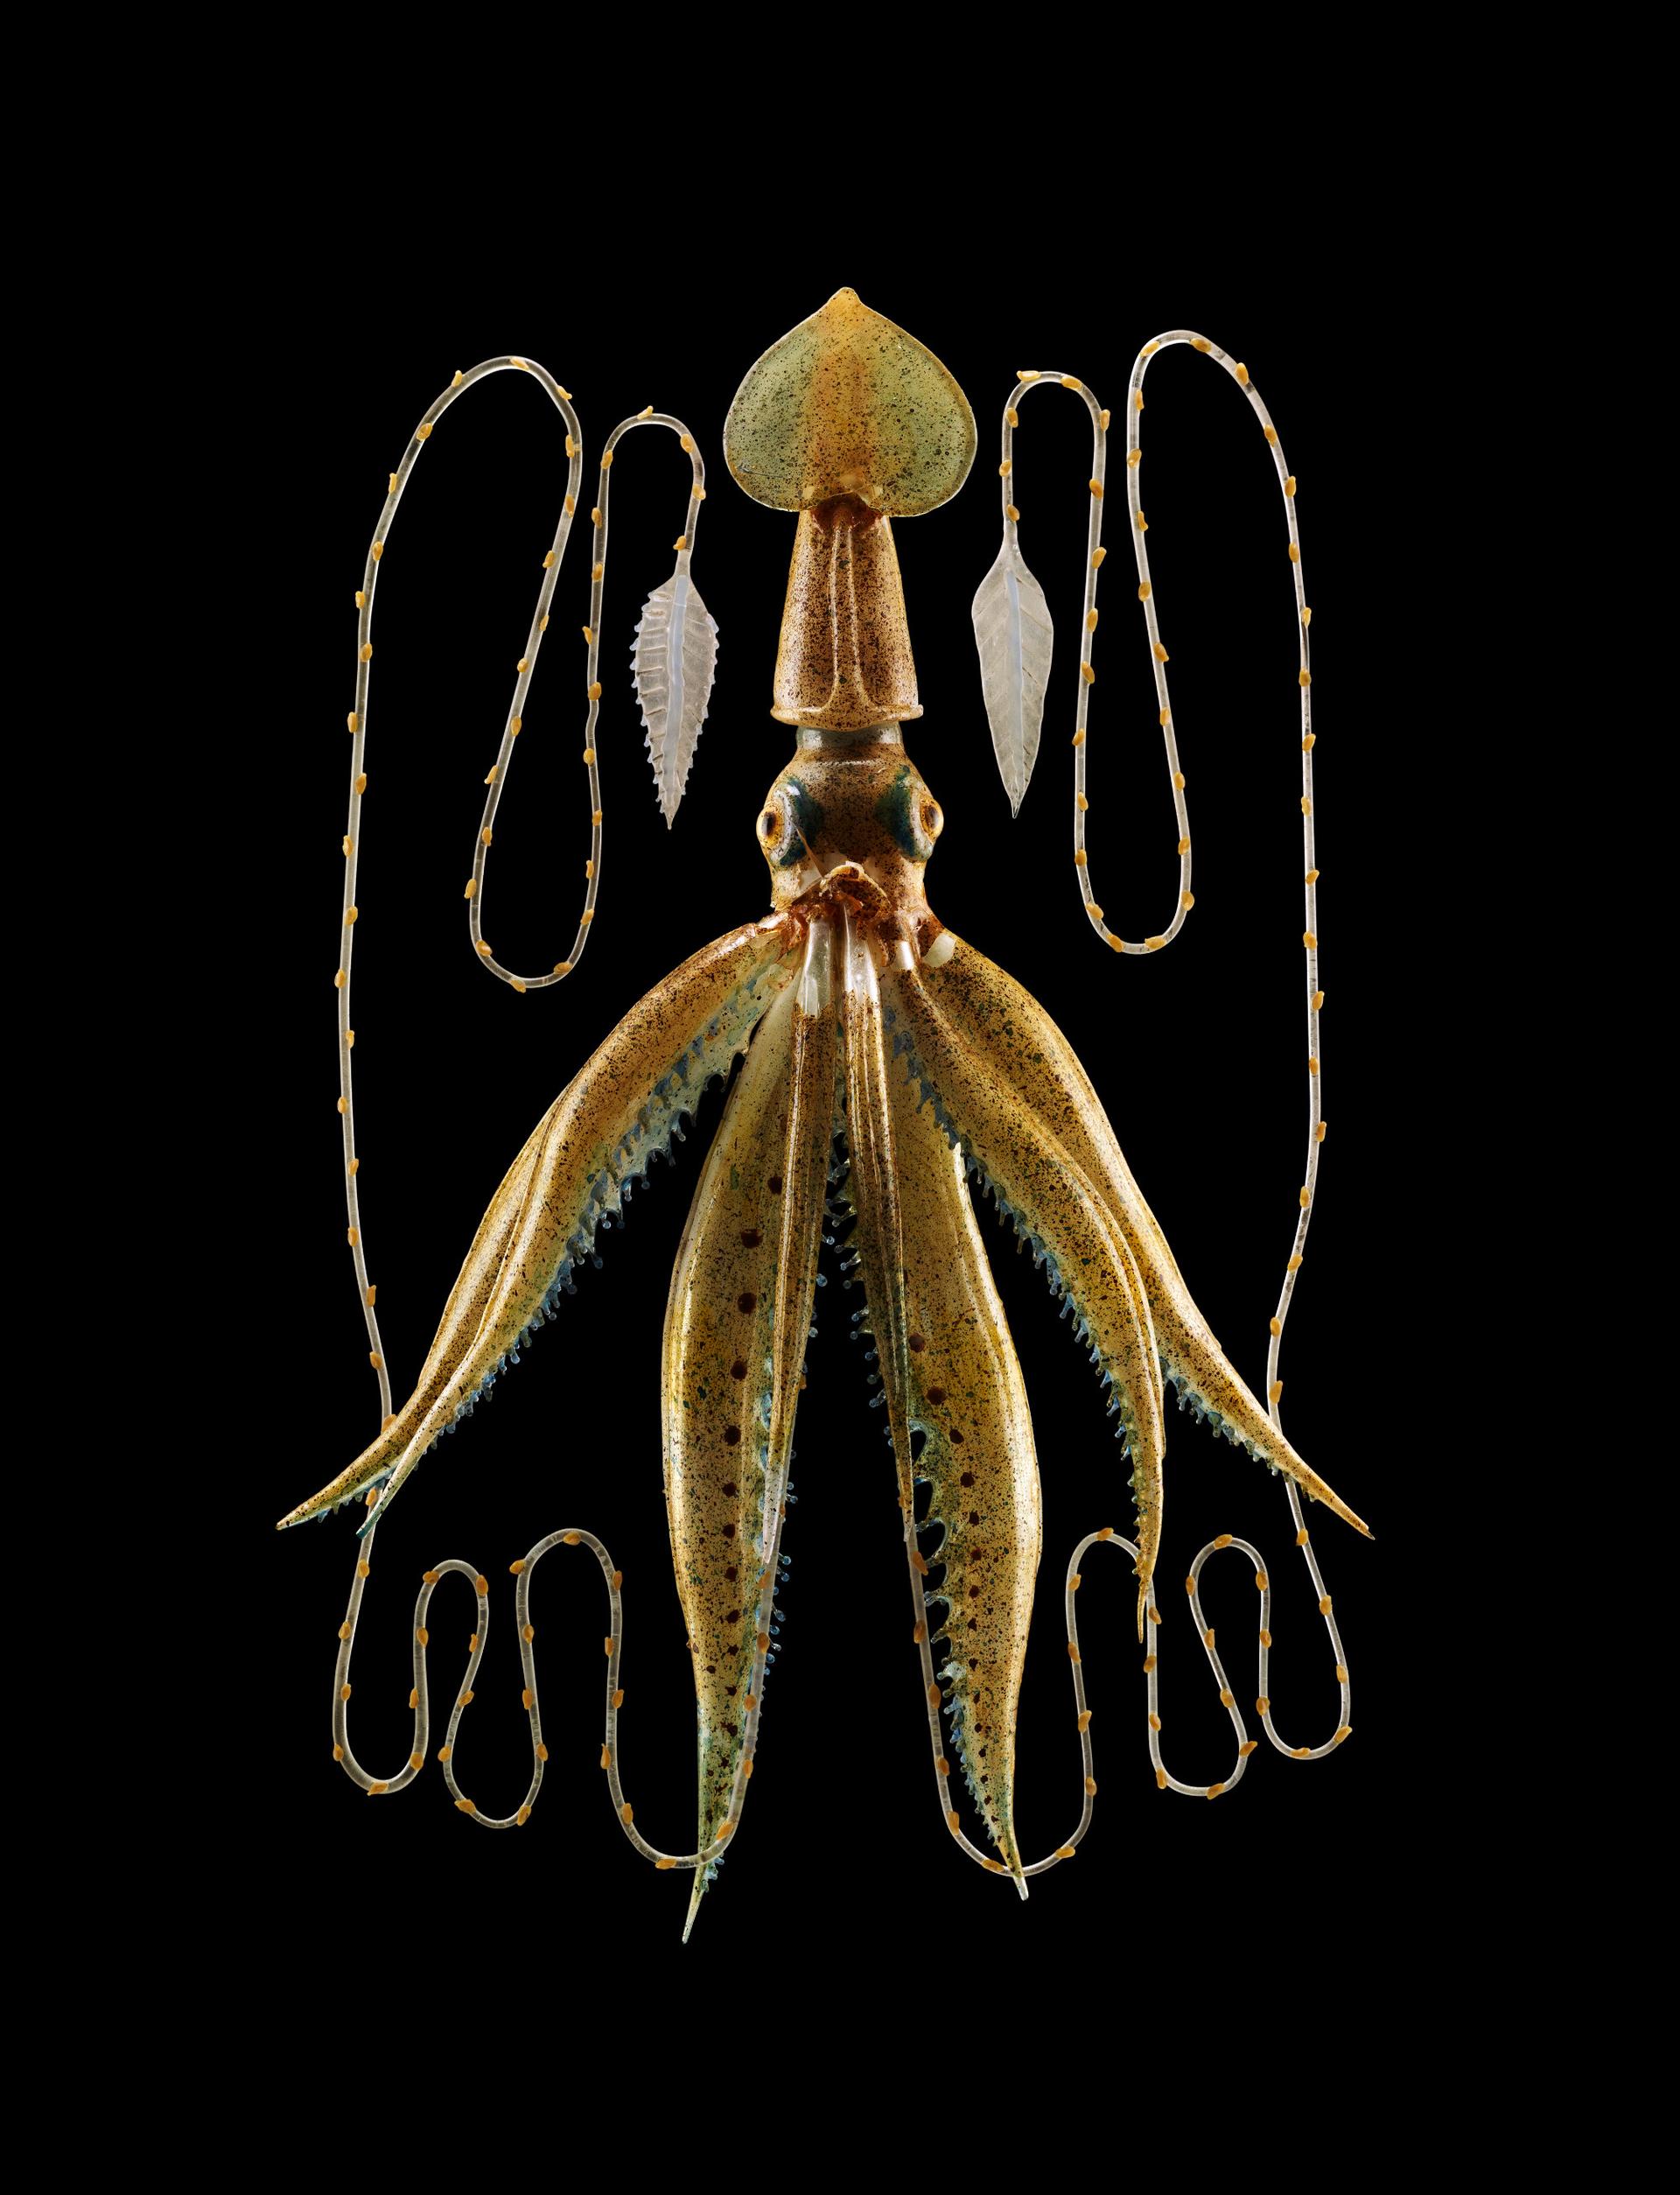 A long-armed squid